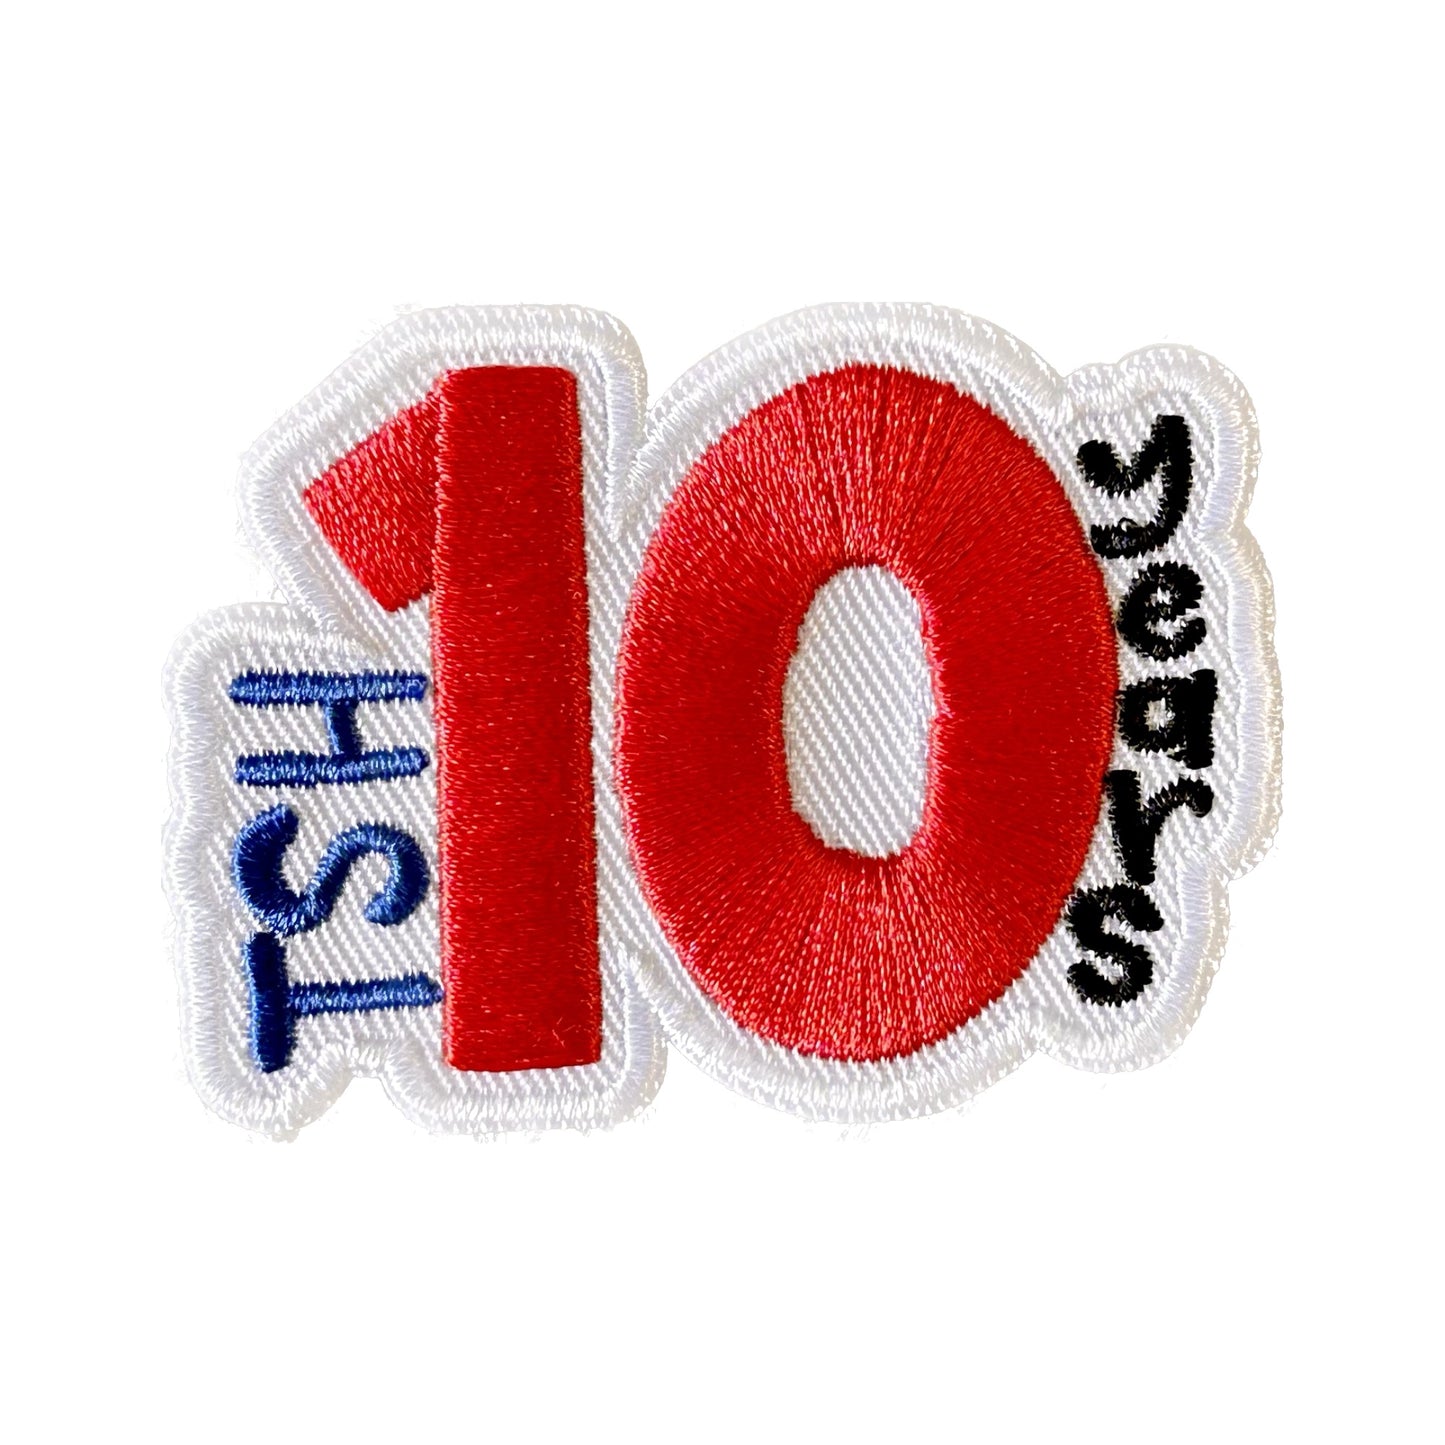 10 Year Anniversary Patch